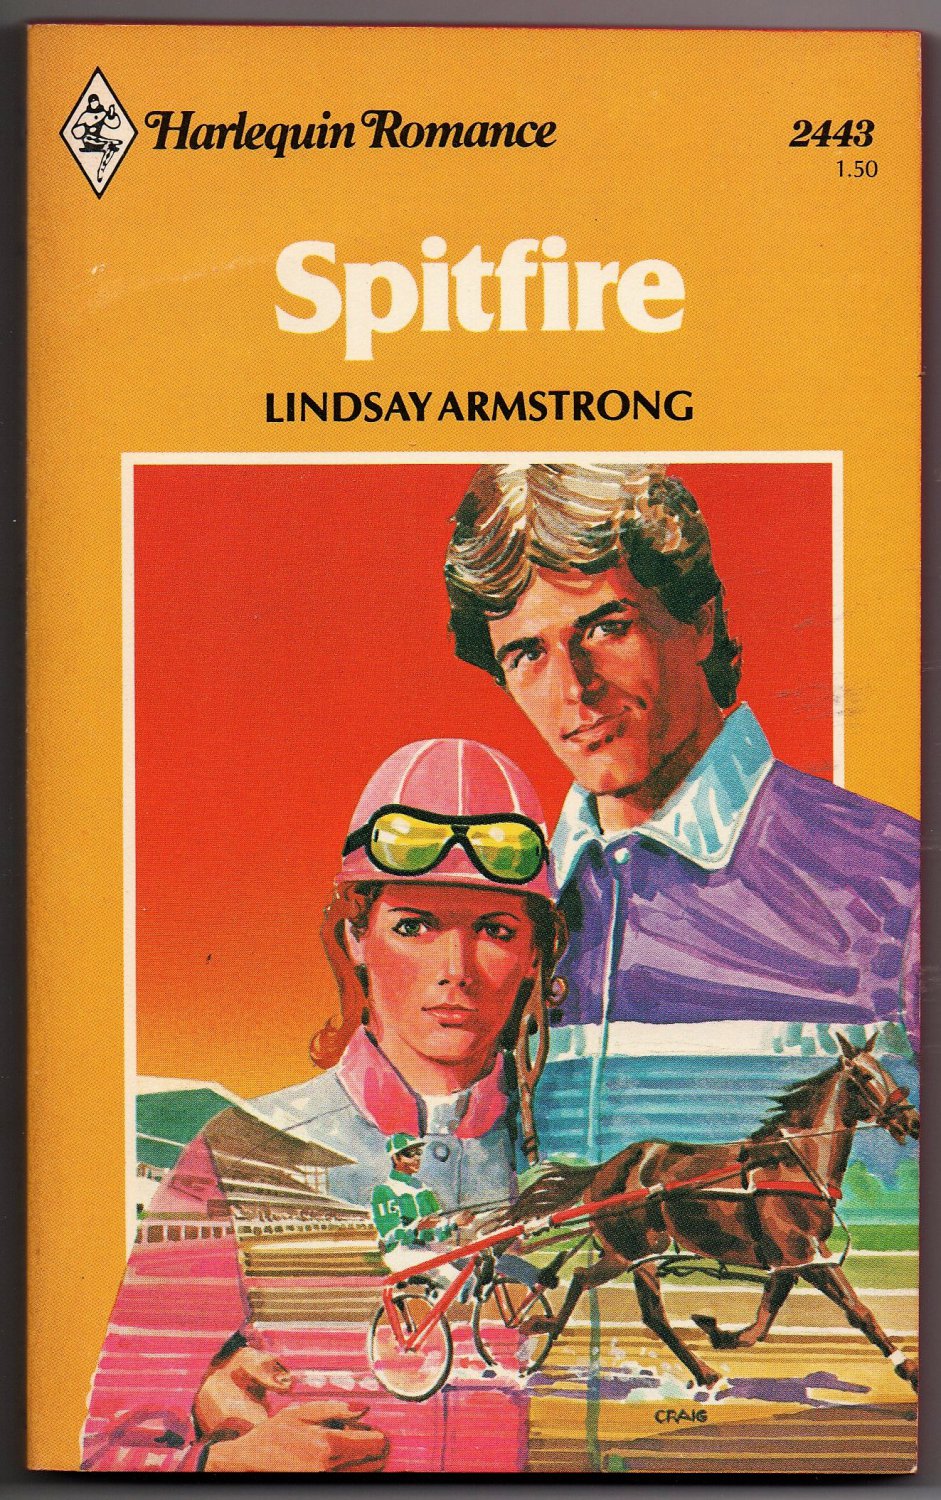 Spitfire by Lindsay Armstrong 1981 Harlequin Romance 2443 0373024436